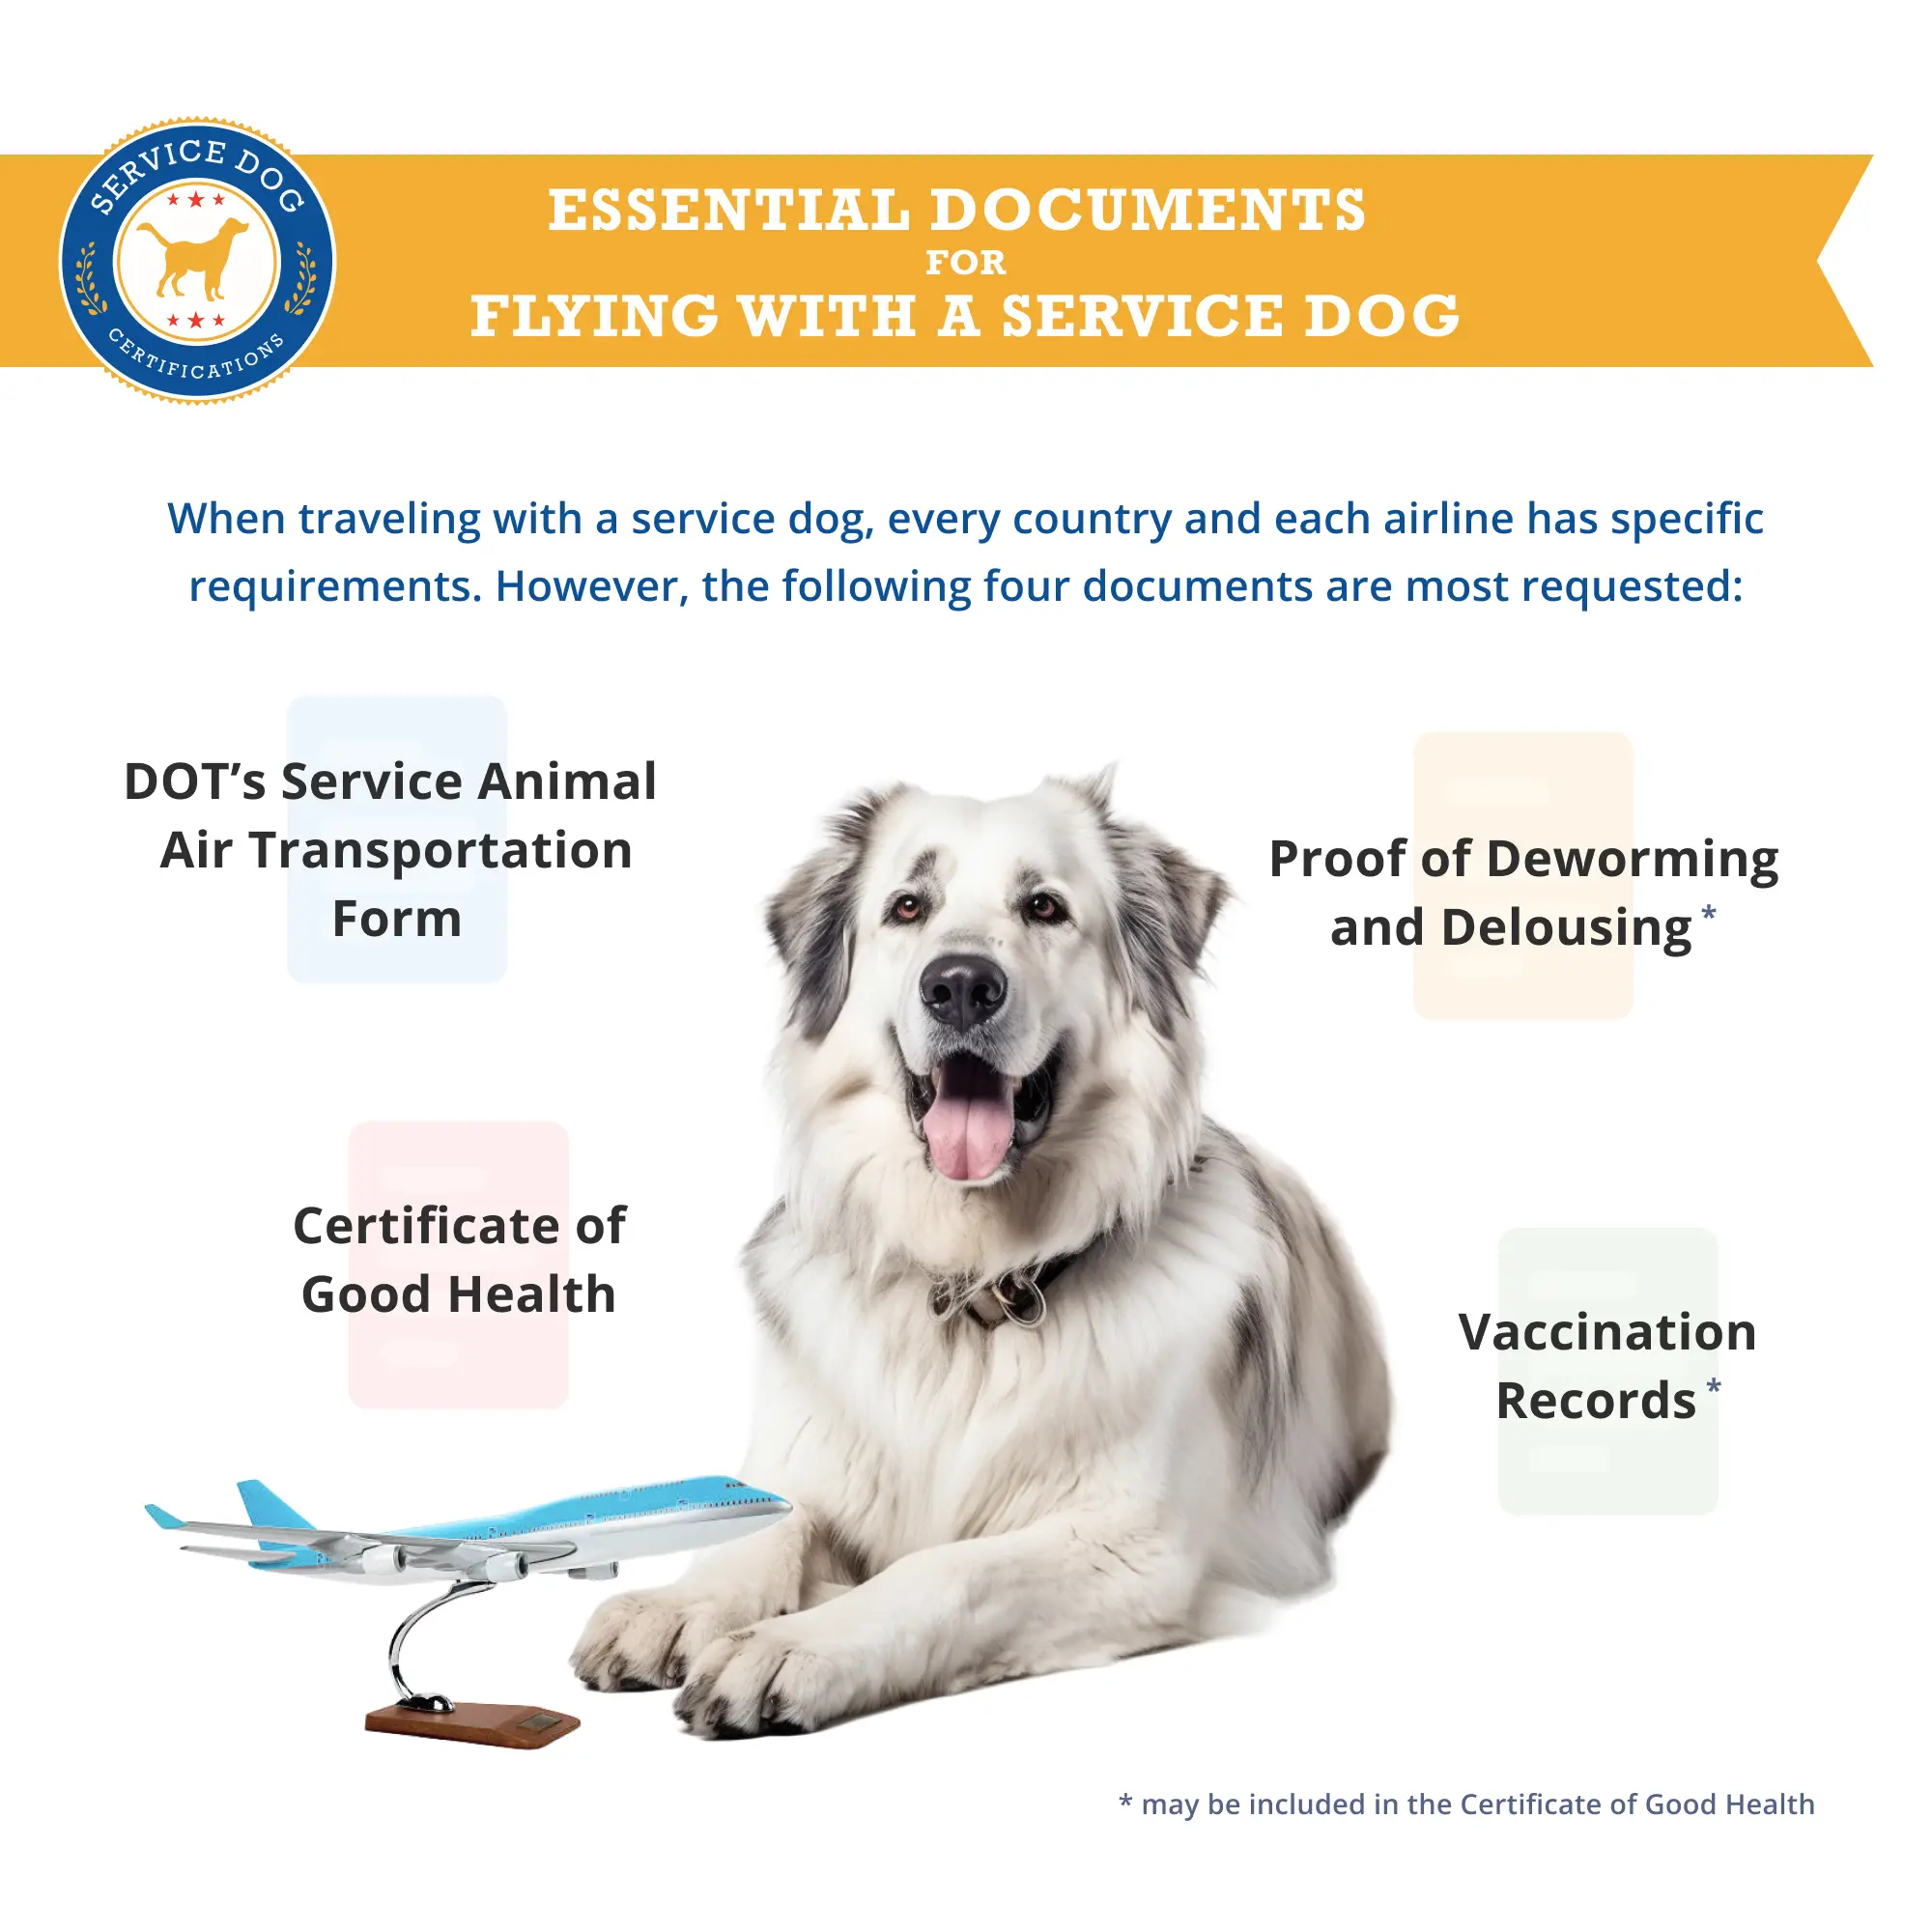 Essential Documents for Flying with a Service Dog - Infographic